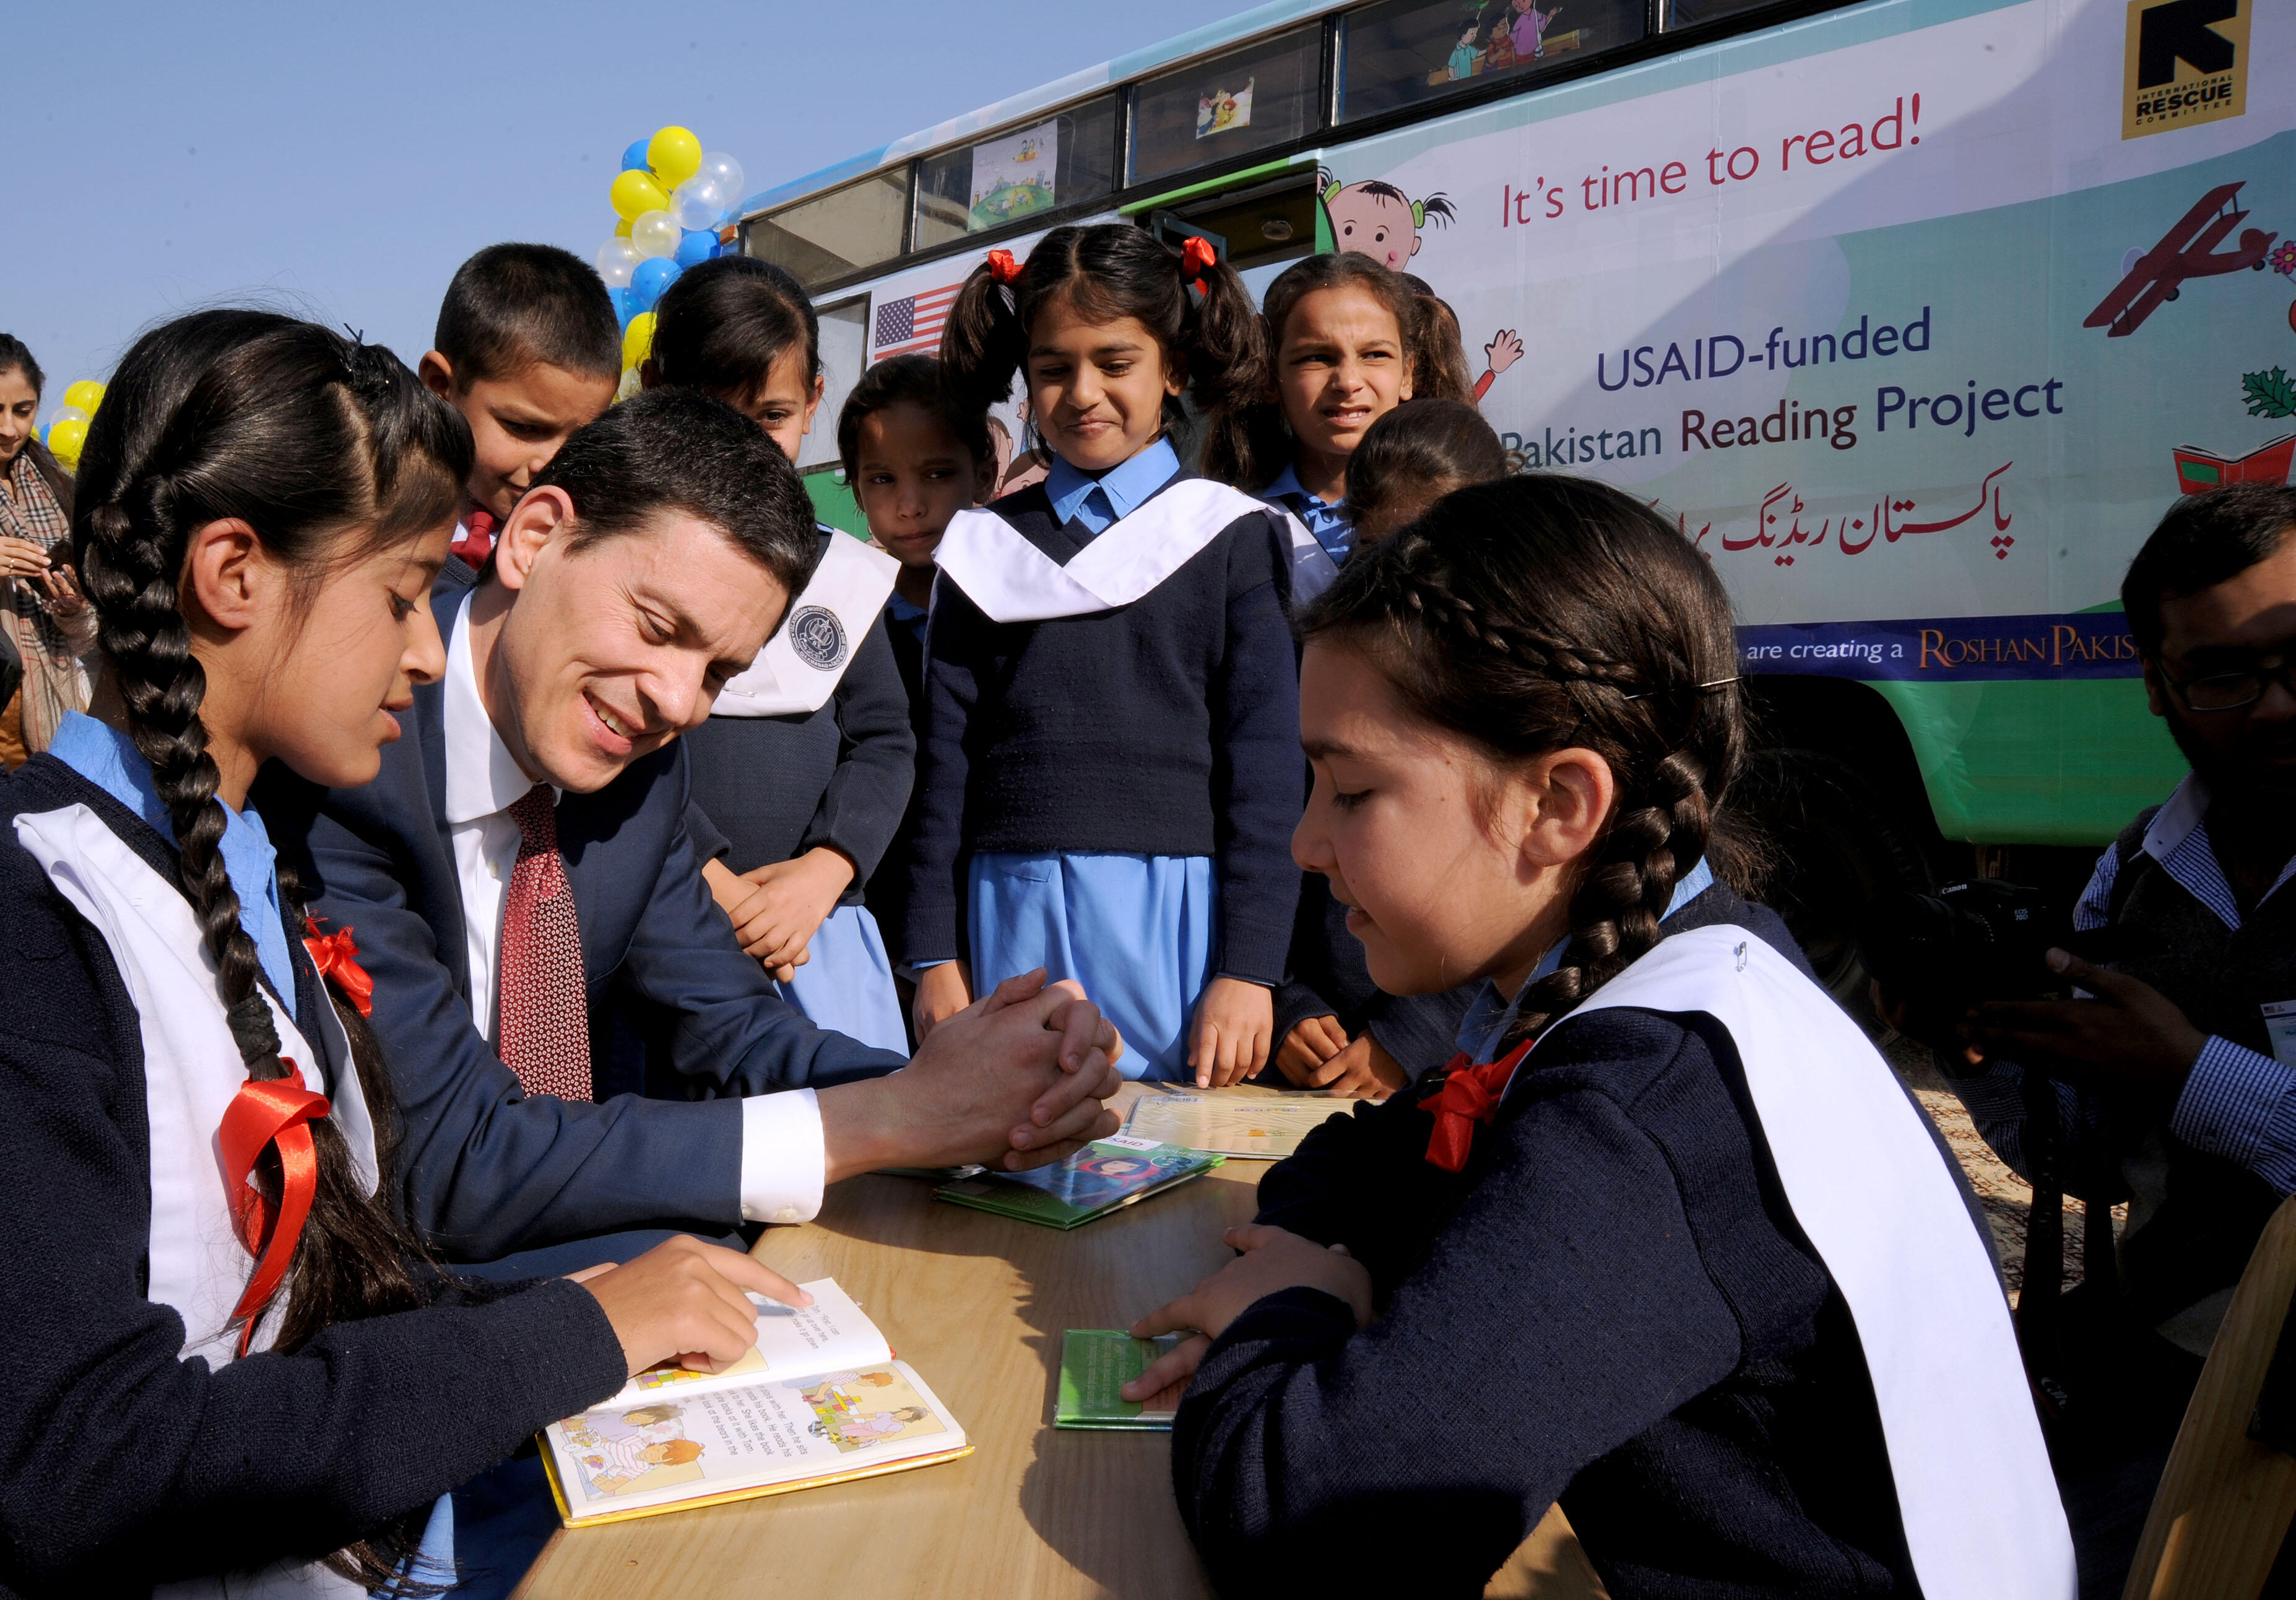 Reading session with students from the Islamabad Model School during the inauguration of the mobile library program.